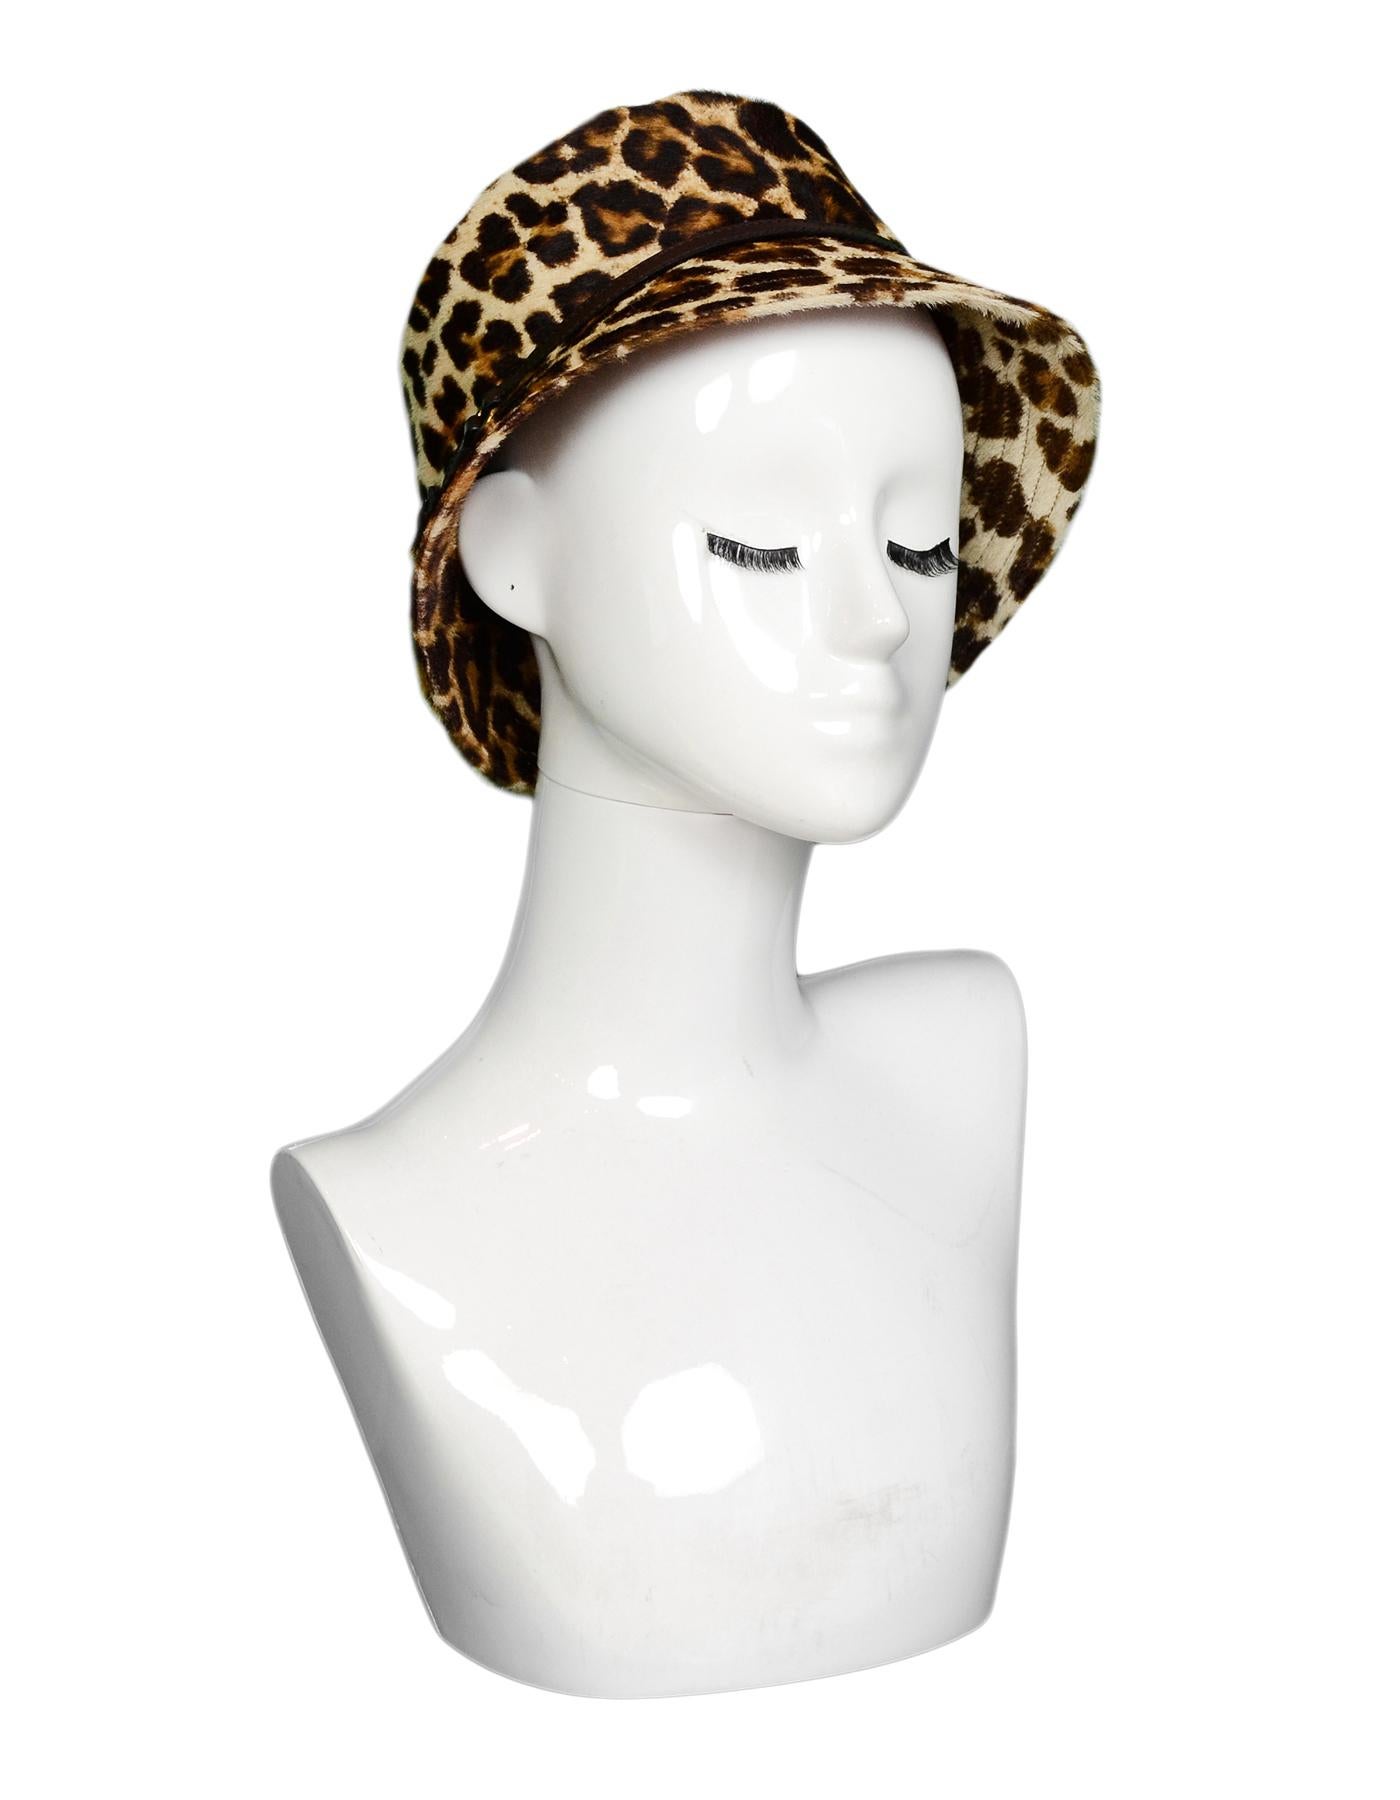 Prada Leopard Print Pony Hair Bucket Hat W/ Leather Trim Sz M

Made In: Italy
Color: Brown, tan
Hardware: Goldtone and gunmetal
Materials: 100% dyed calfskin fur, trim- 100% leather 
Lining: 100% nylon
Closure/Opening: Pull on
Overall Condition: